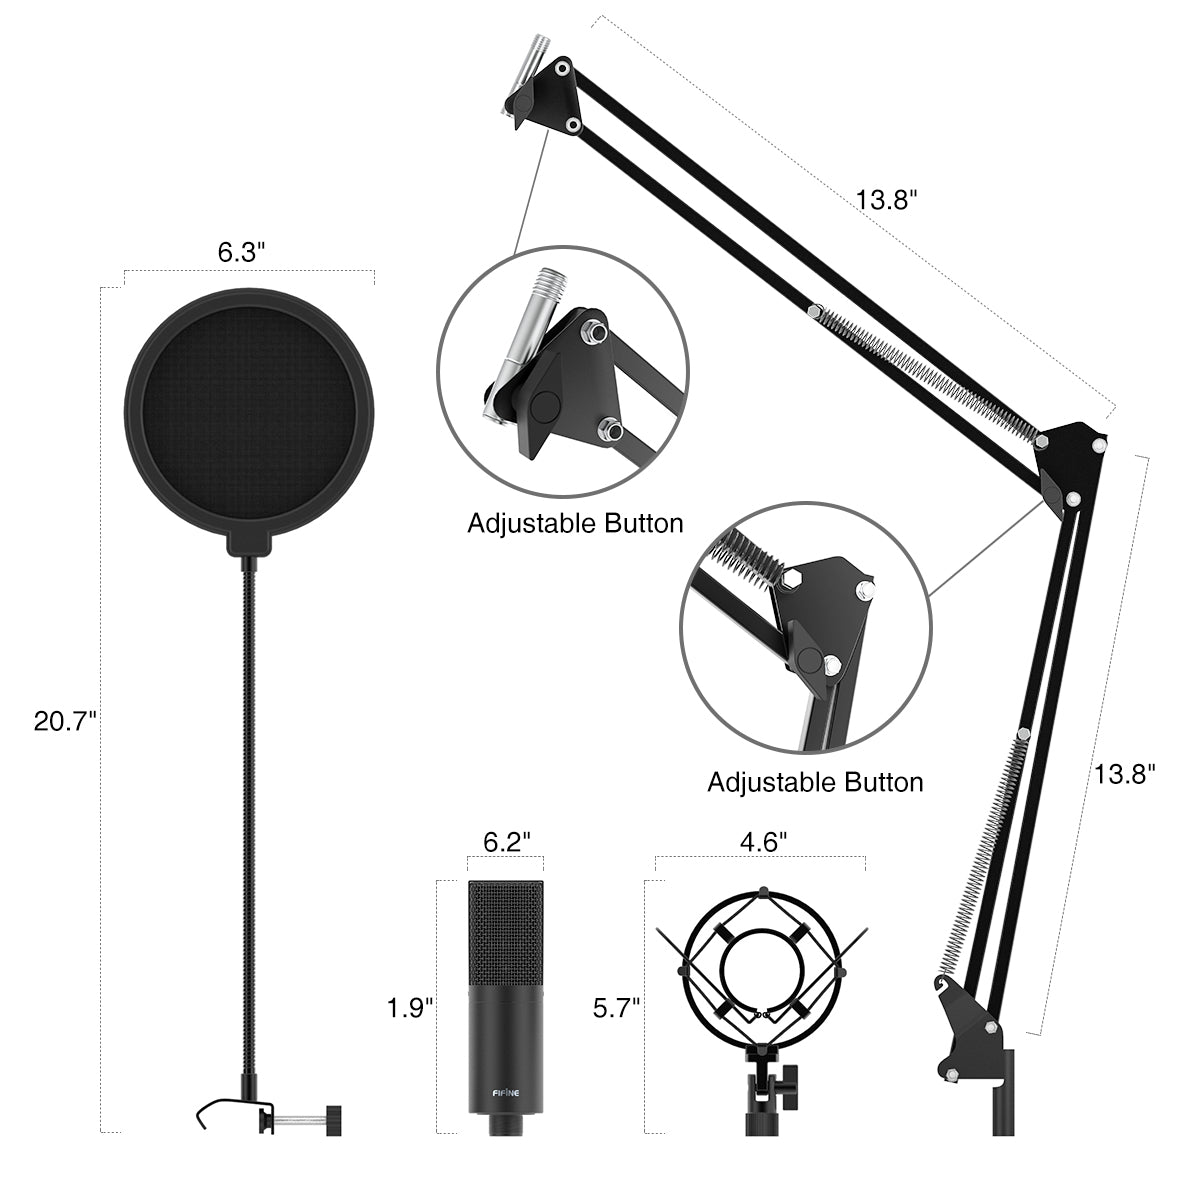 FIFINE K780A Studio USB Mic Kit with 19mm Capsule Arm Stand, Shock Mount, Pop Filter for Voiceover Podcast